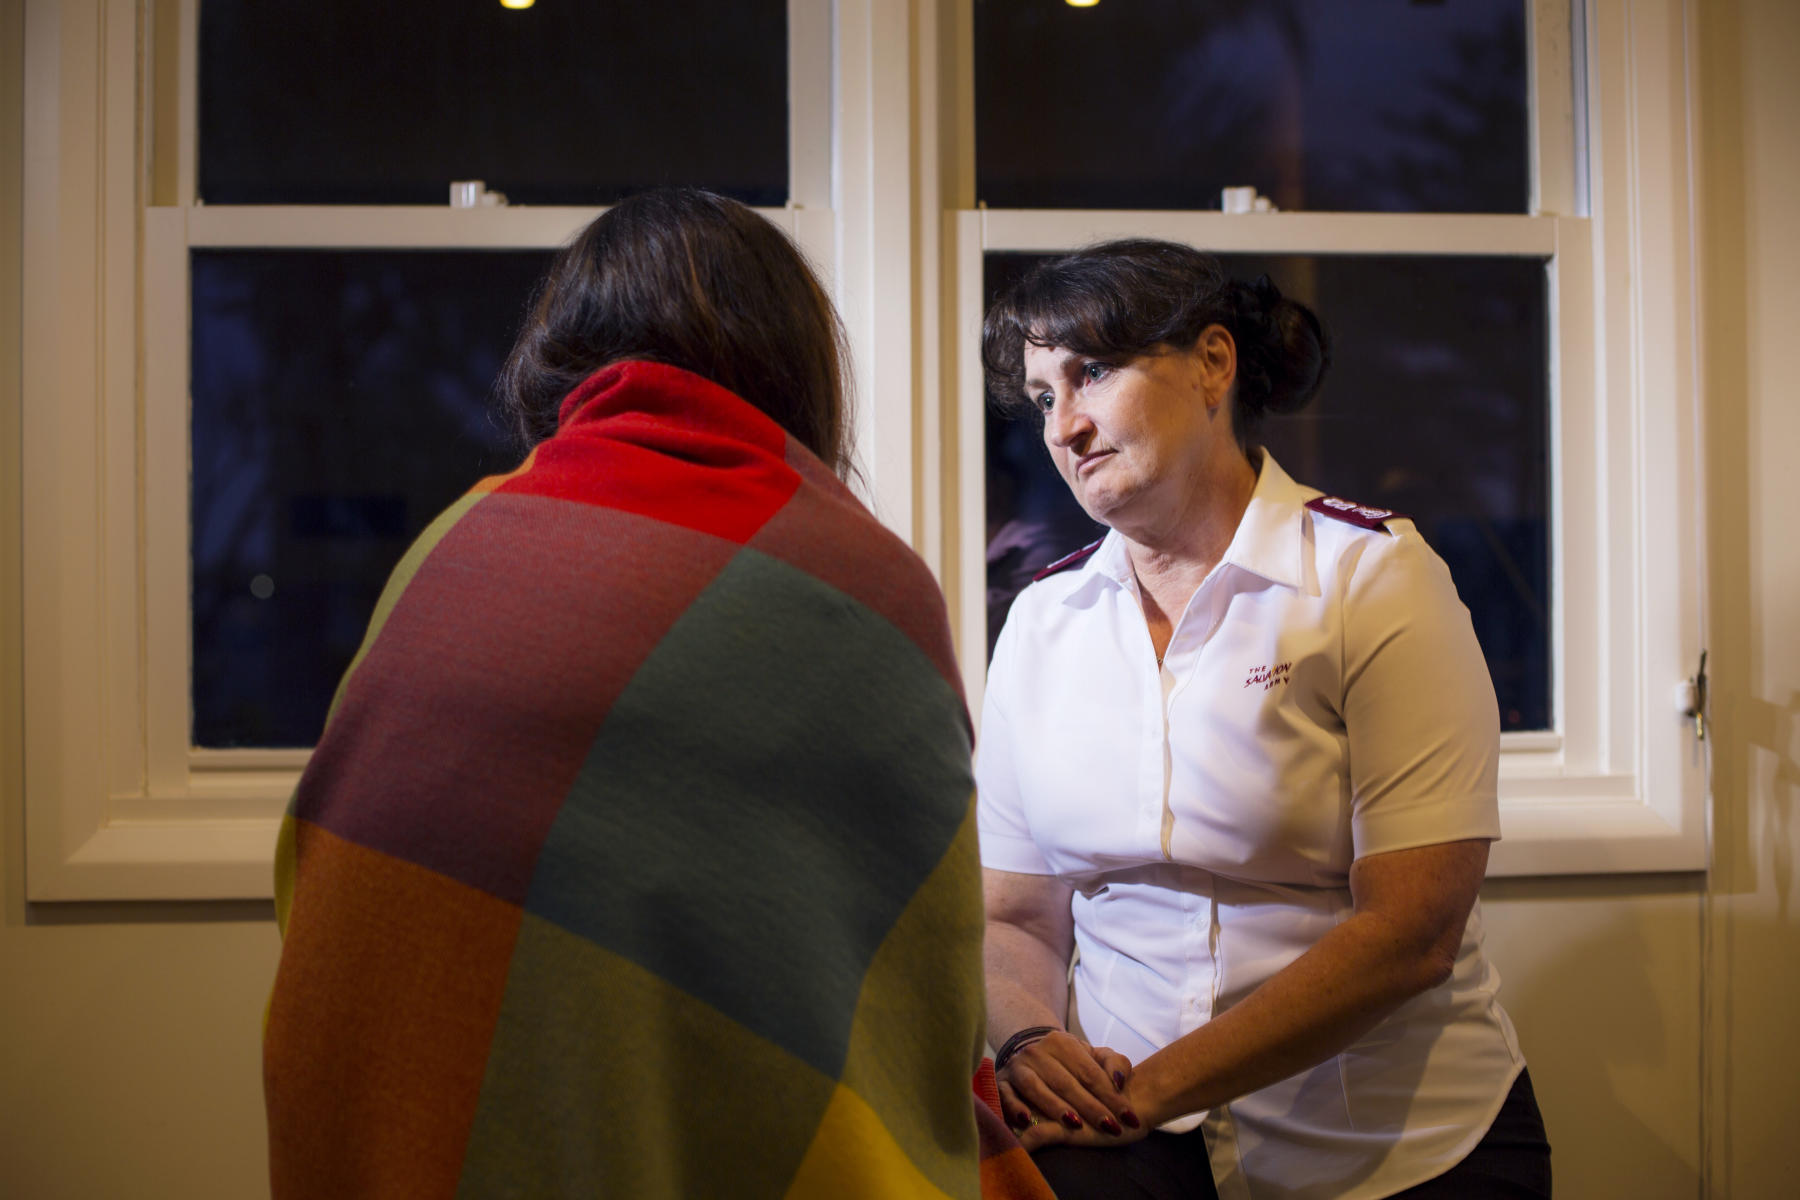 Salvos officer offering support to a domestic violence victim